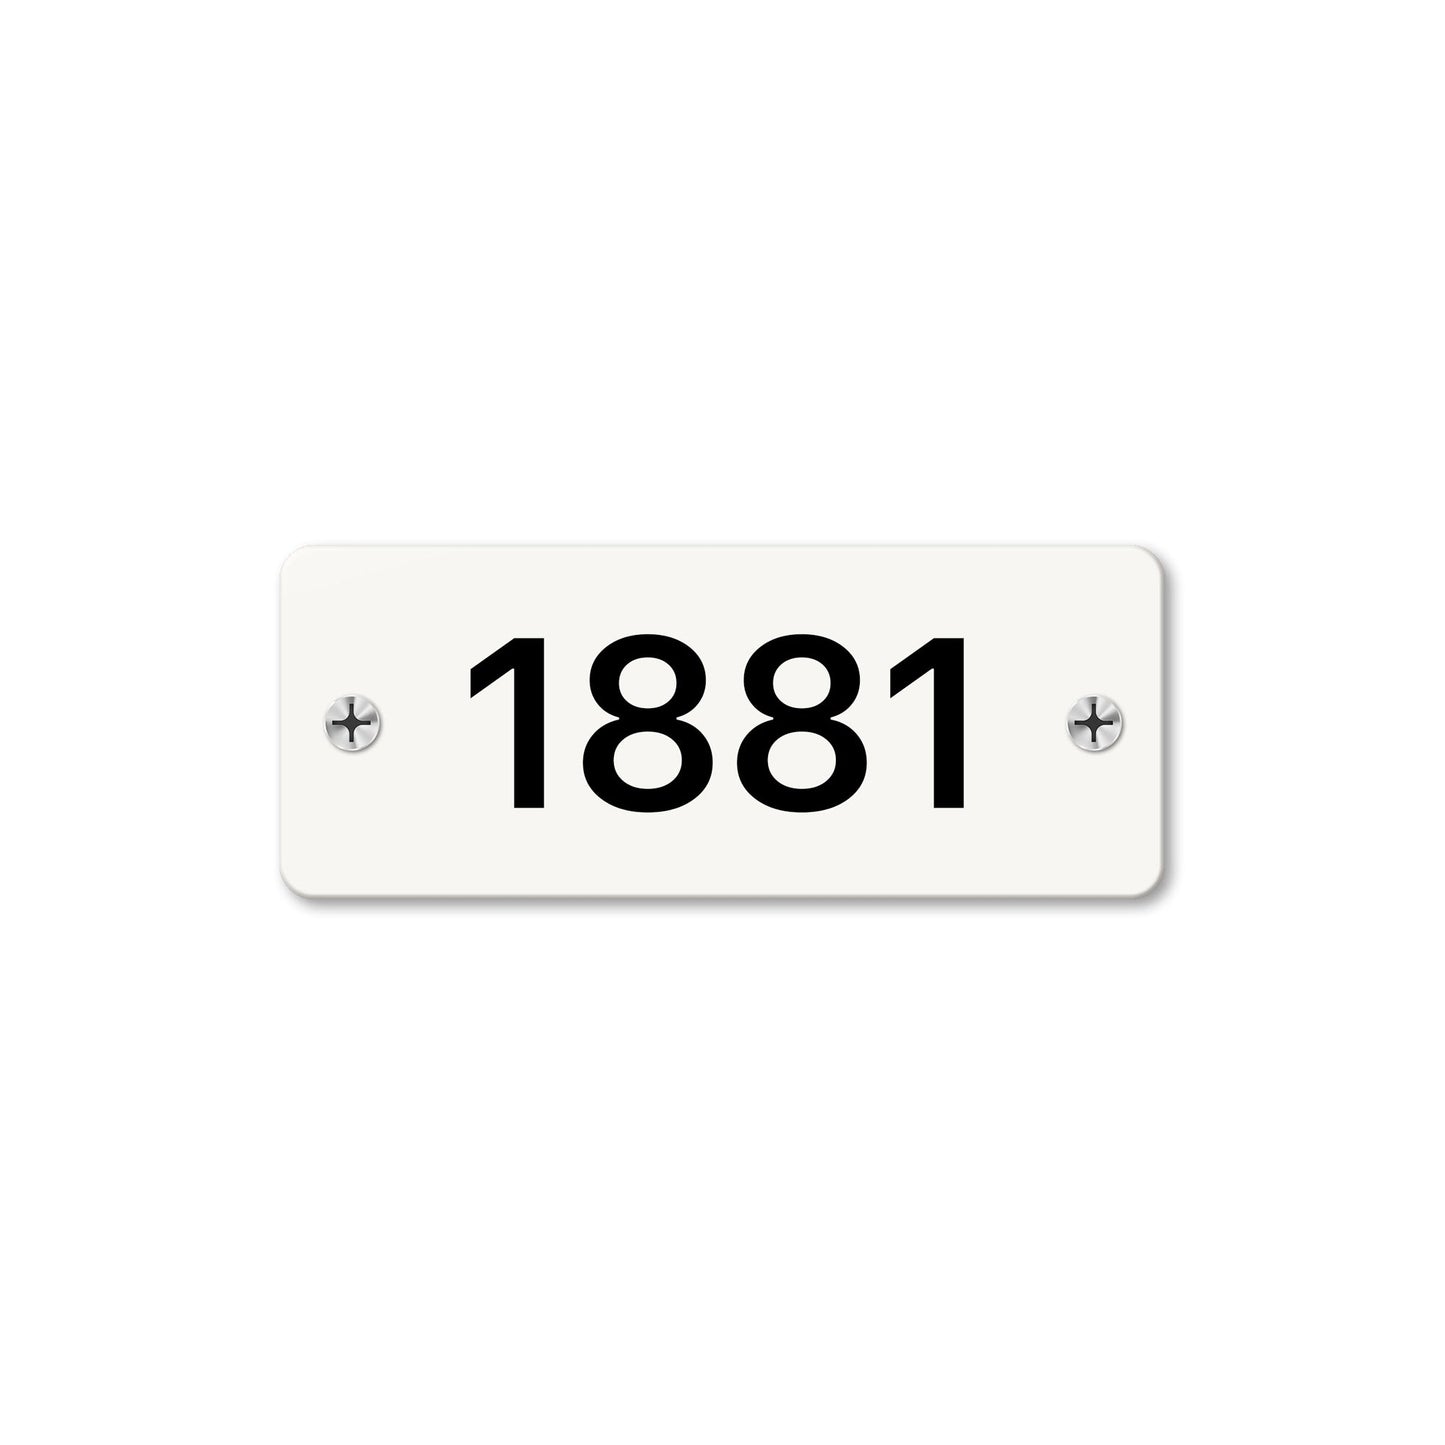 Numeral 1881